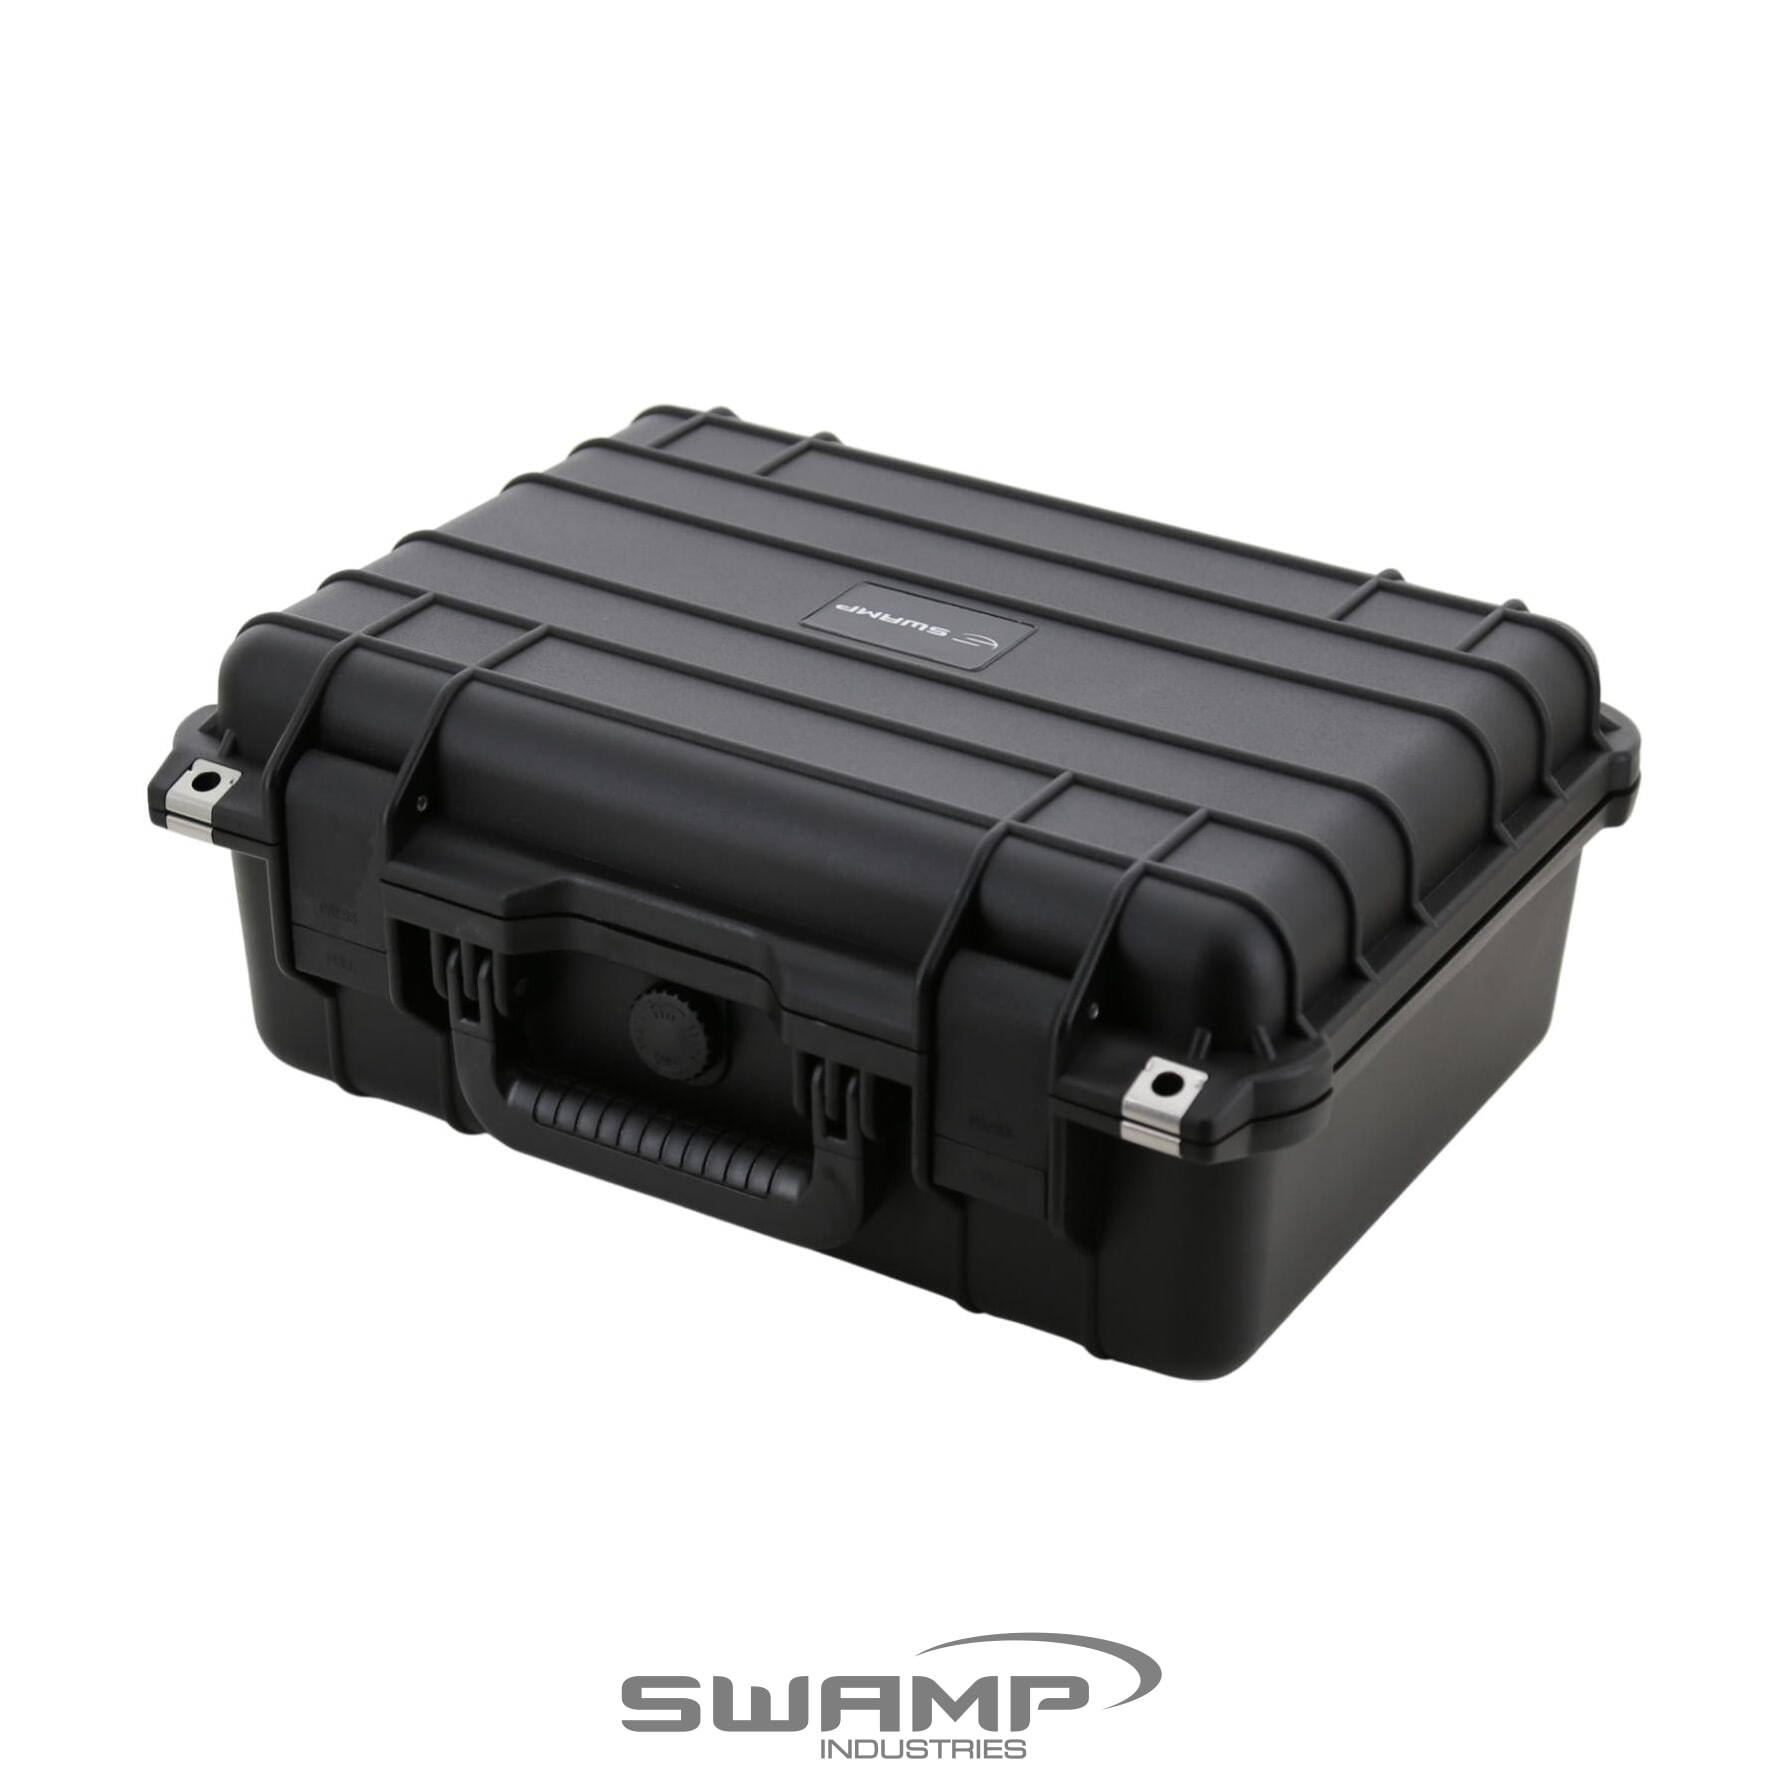 SWAMP Light Multi Purpose Padded Carry Bag for Audio Cables Lighting Accessories